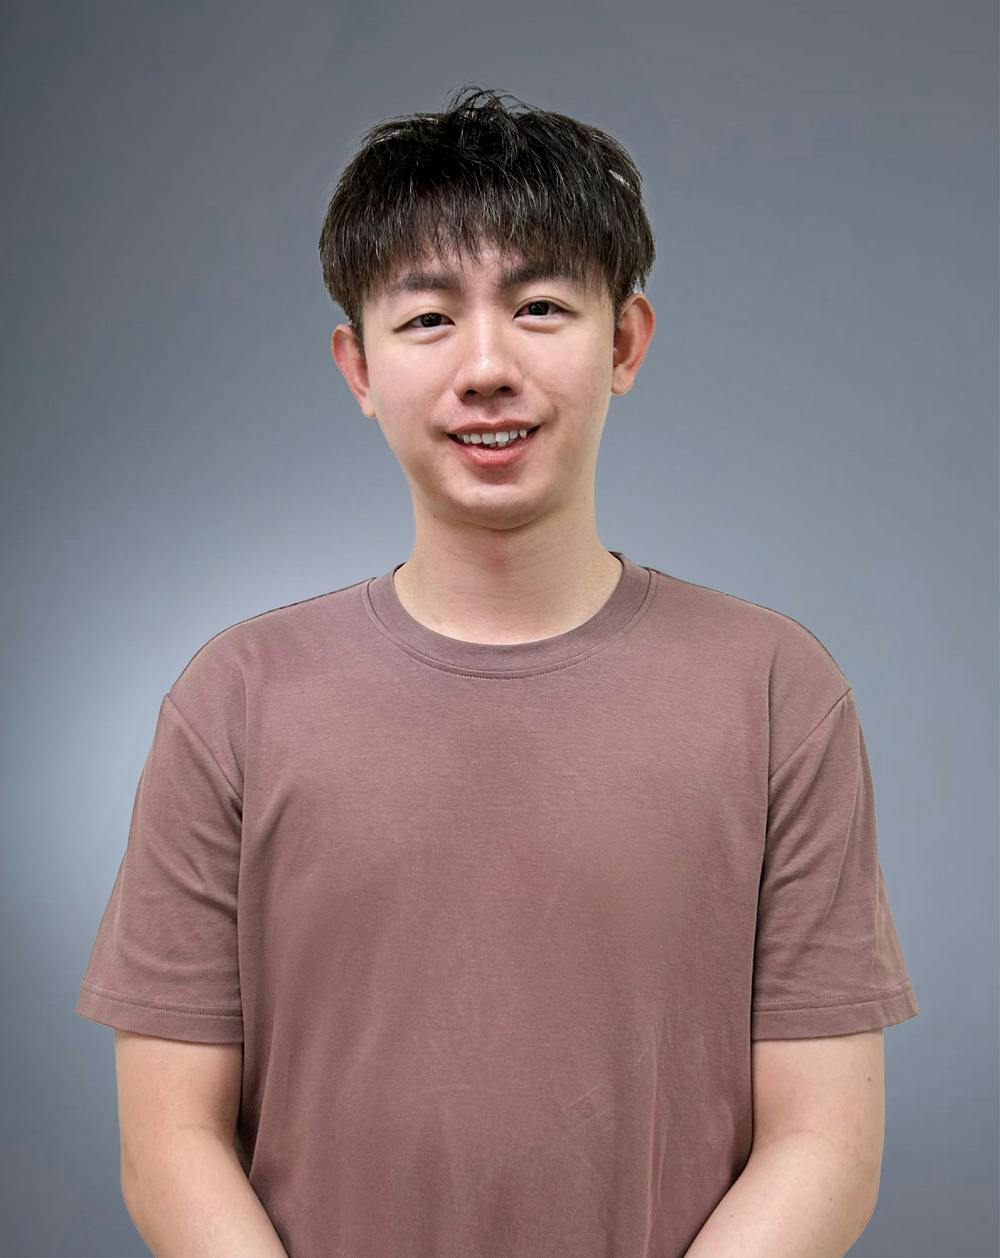 Profile image for Kyle Wong